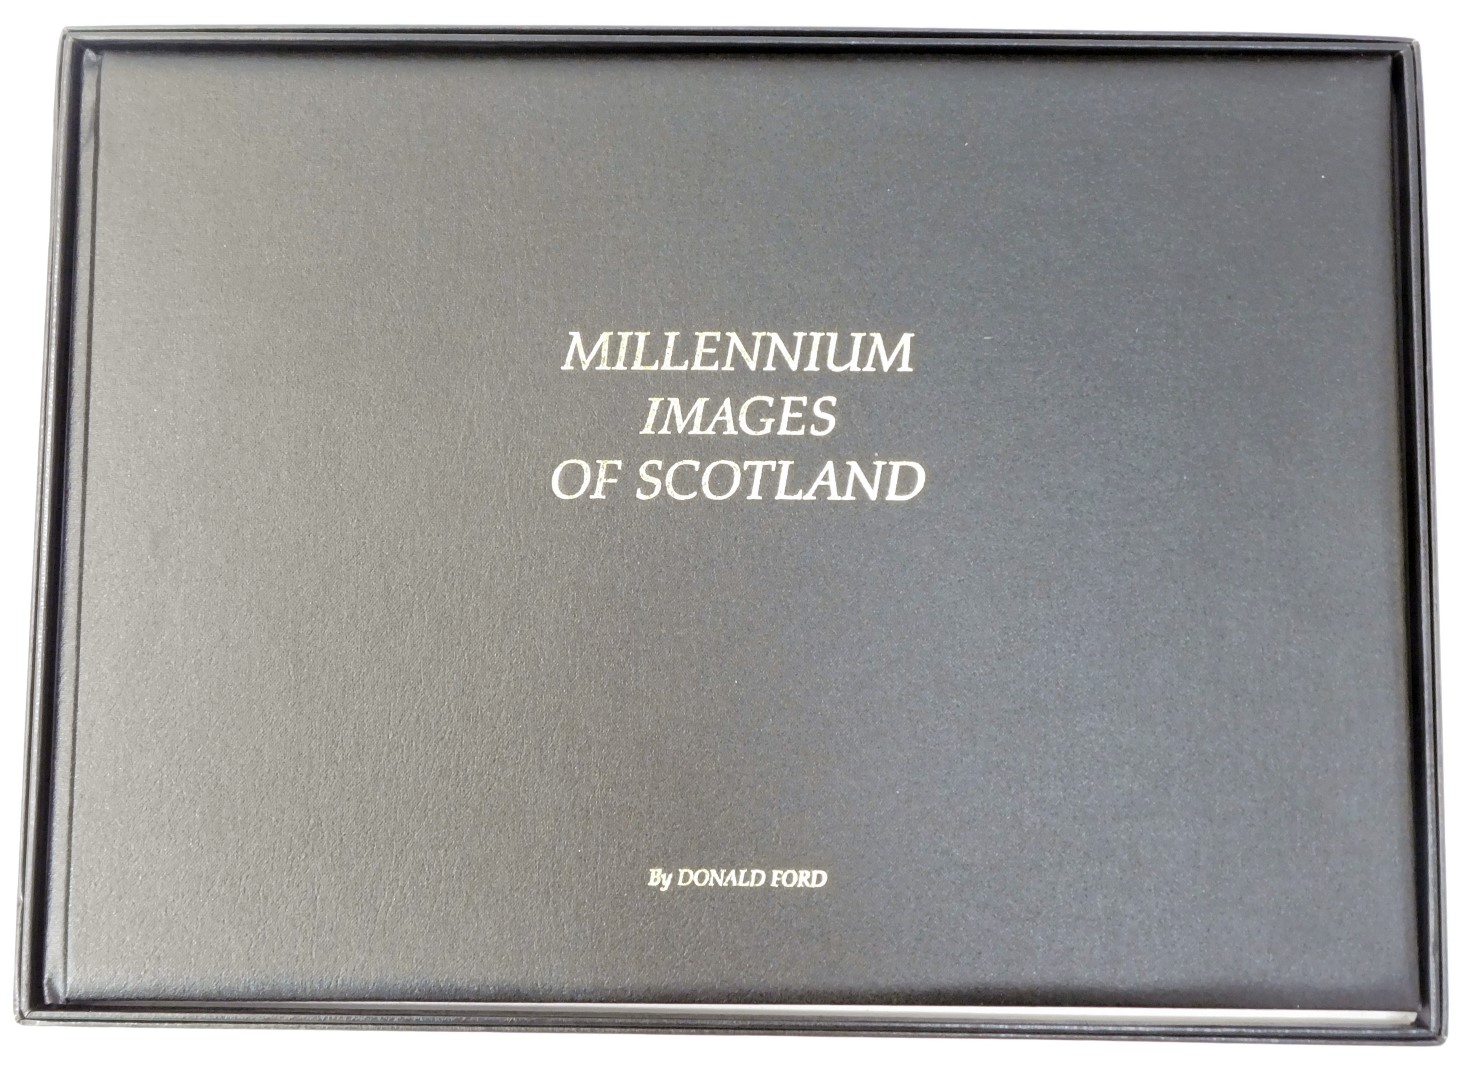 Ford (Donald). Millennium Images of Scotland, collector's book, with hand inscription to Sandy and D